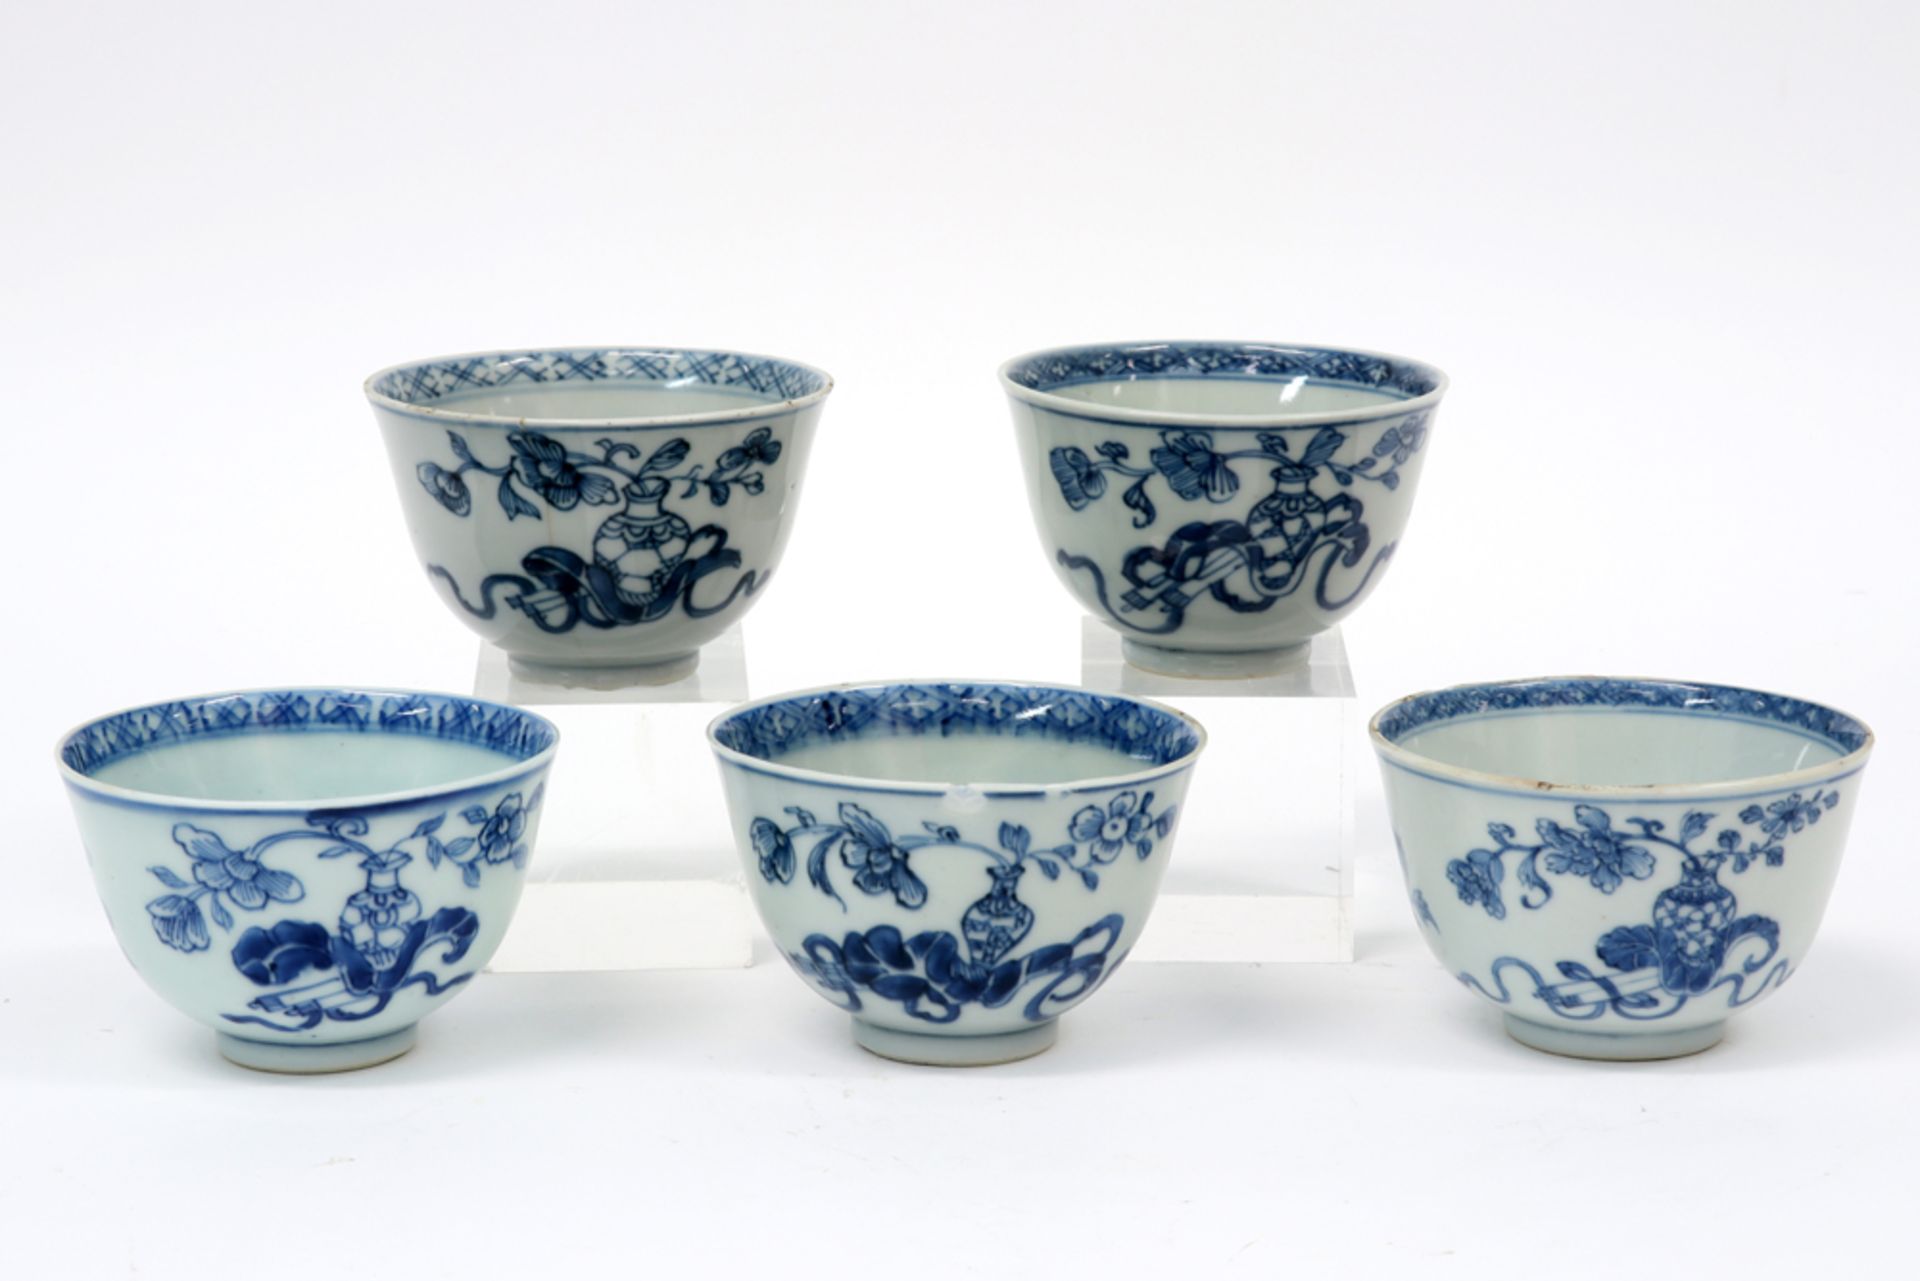 series of five 18th Cent. Chinese tea cups in porcelain with a floral blue-white decor || Reeks - Image 2 of 3